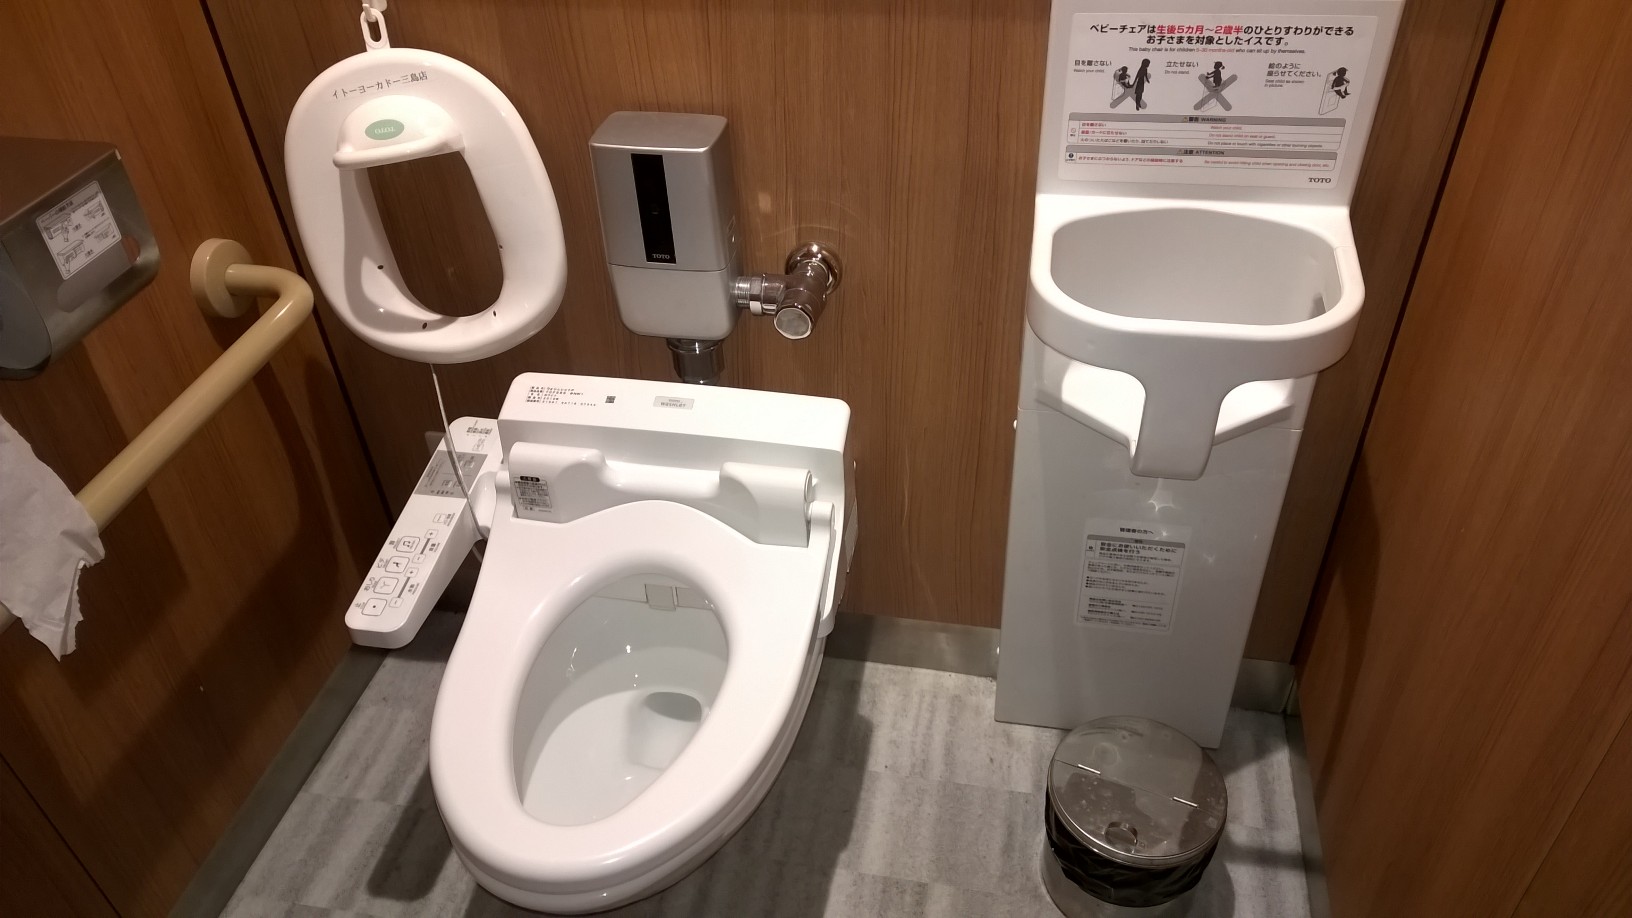 High-tech toilets, the Japanese brought this to the next level...